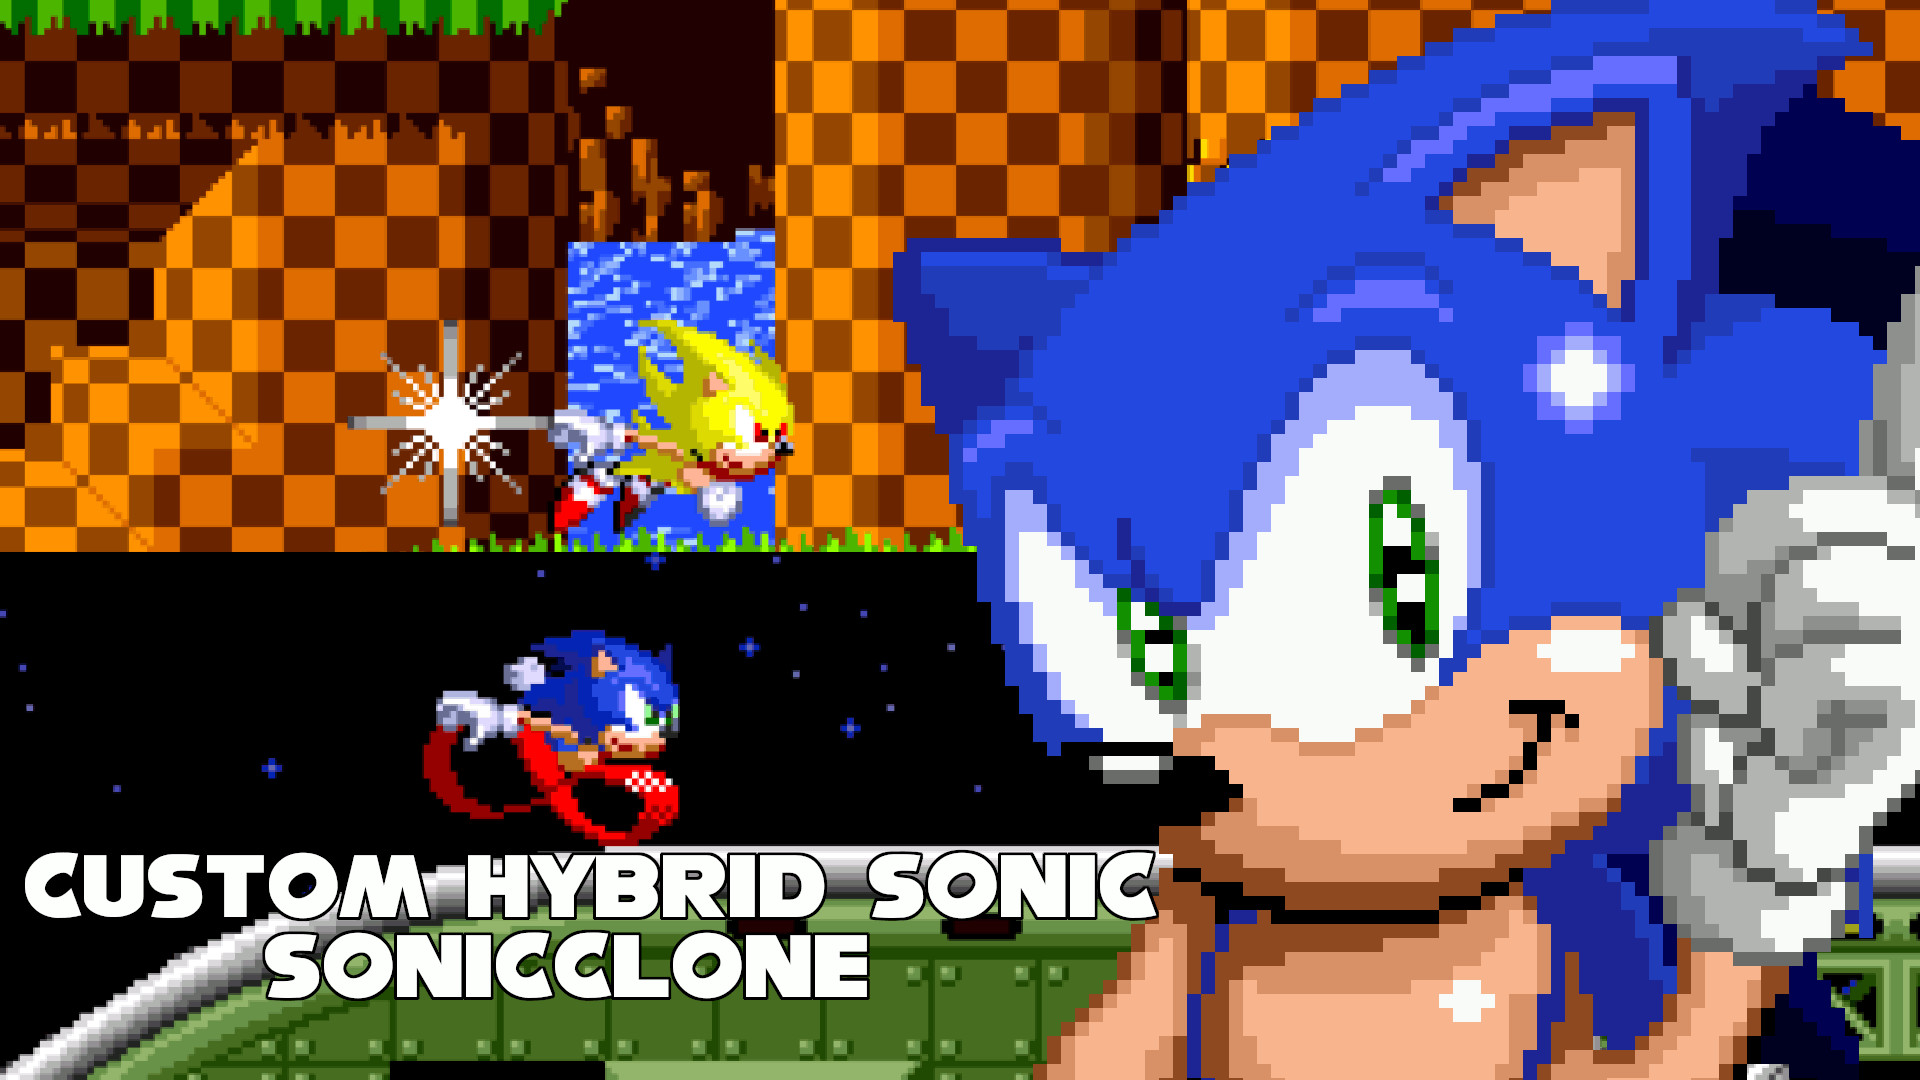 They actually remade the original Sonic 1 title screen sprites for this  animation, Sonic the Hedgehog